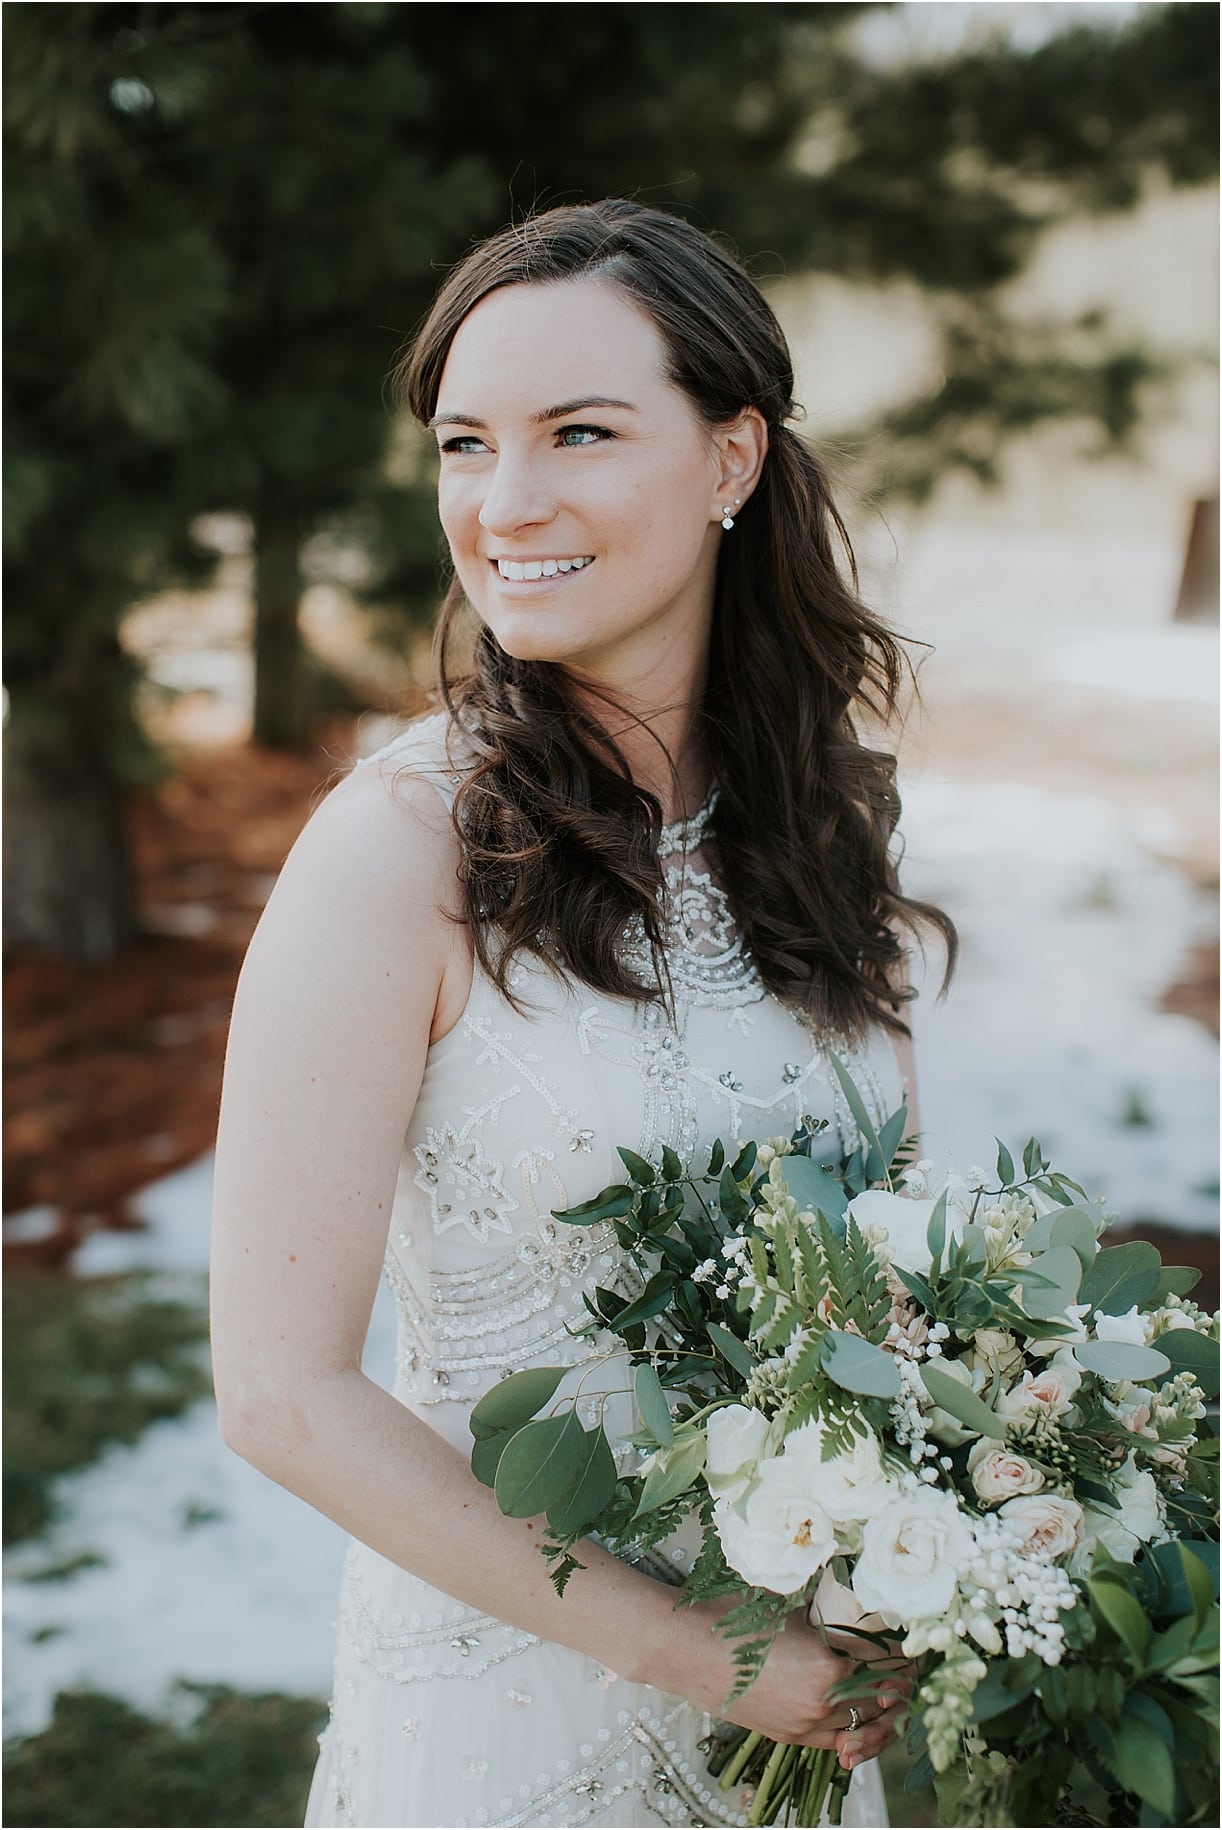 Lovely Virginia Vineyard Wedding as seen on Hill City Bride Blog by Vness Photography - bride